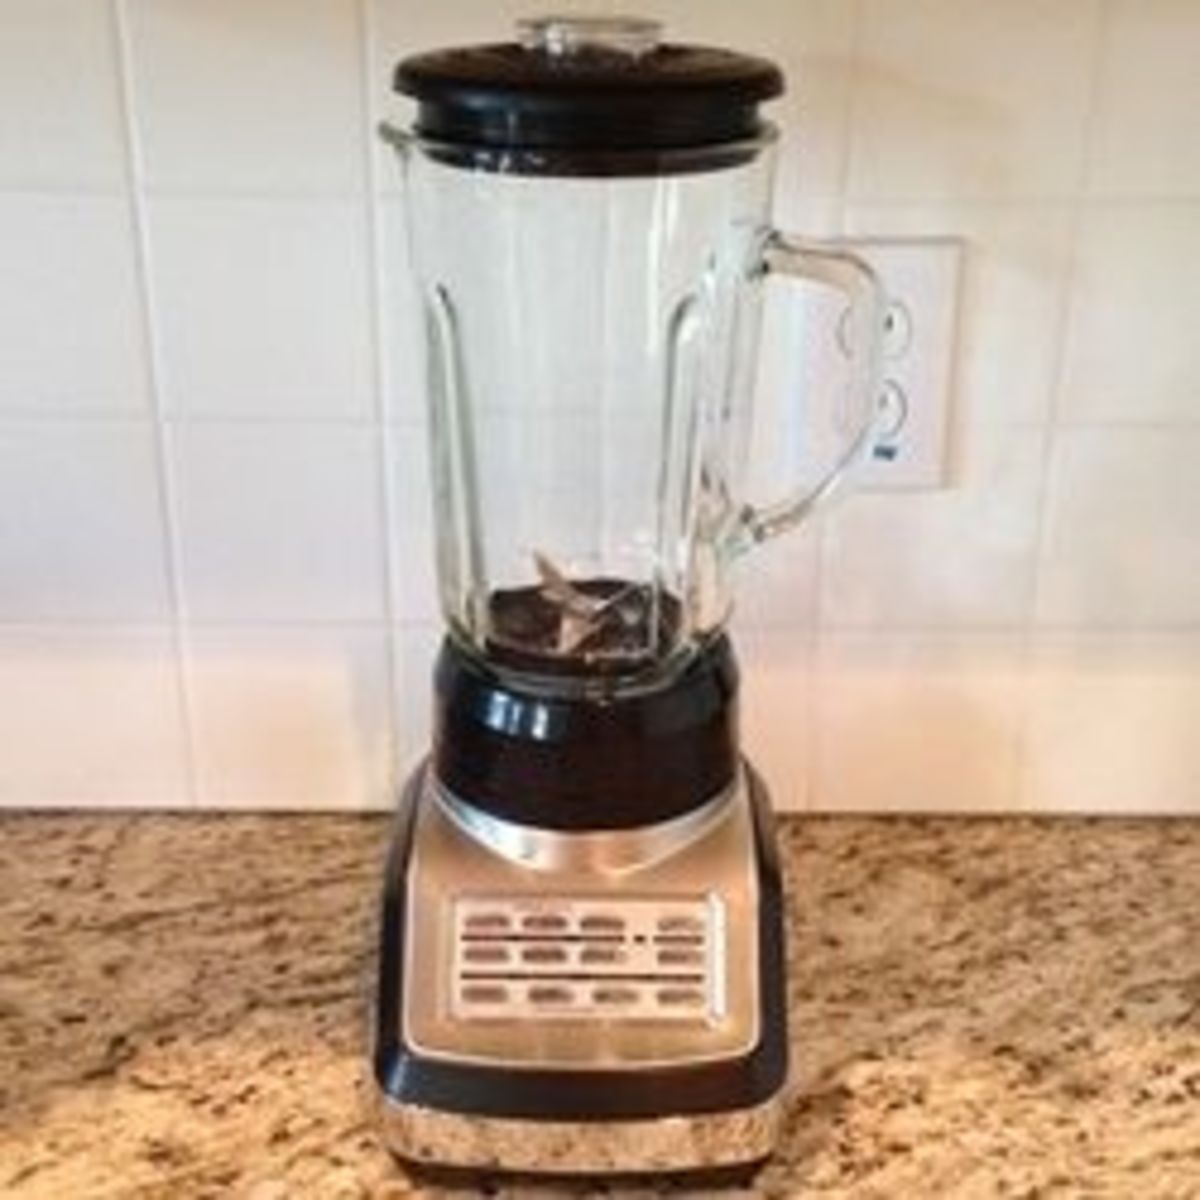 This photo above is not the image of either of these Vitamix blenders, but the actual Farberware blender that was the inspiration and motivation for this review in the first place. I wanted to give it 15 minutes of fame before its pending retirement.